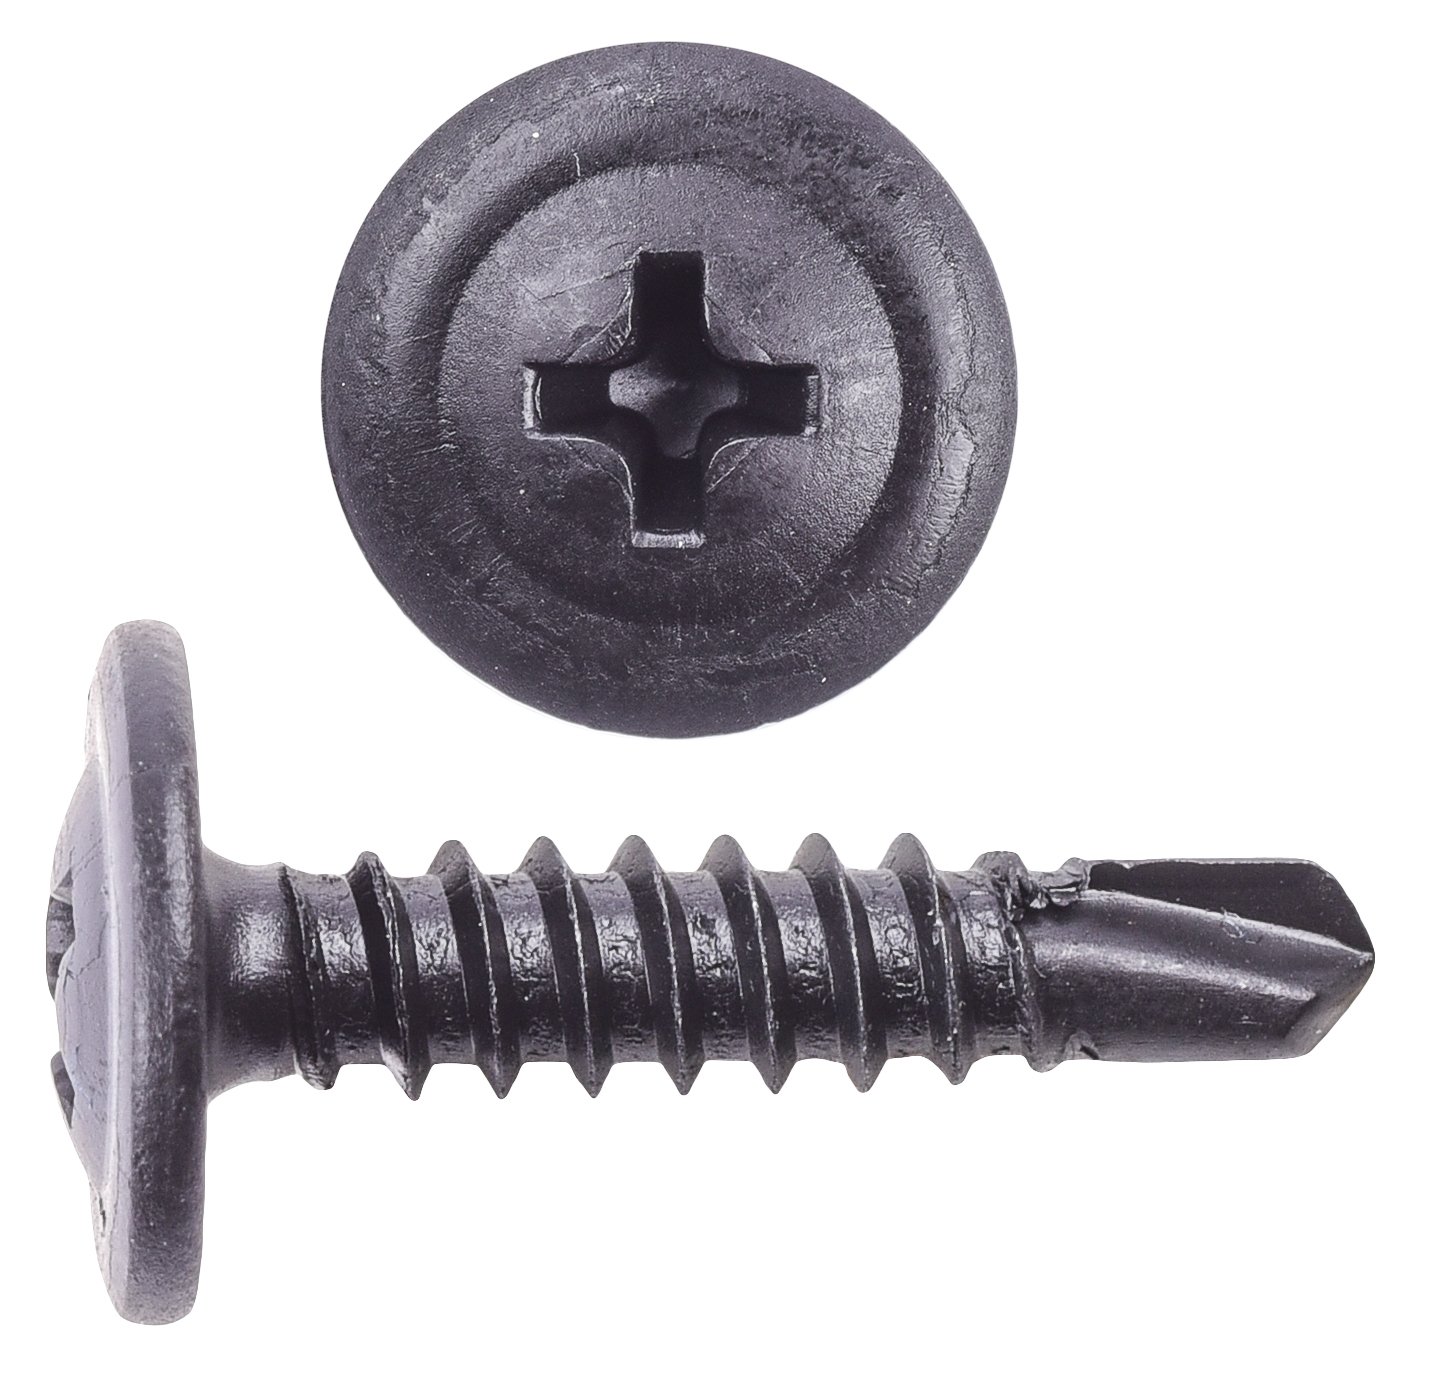 Phillips Oval Washer Head Trim Screws #8 x 3/4 in. UHL [Self-Tapping, 50 Pieces]